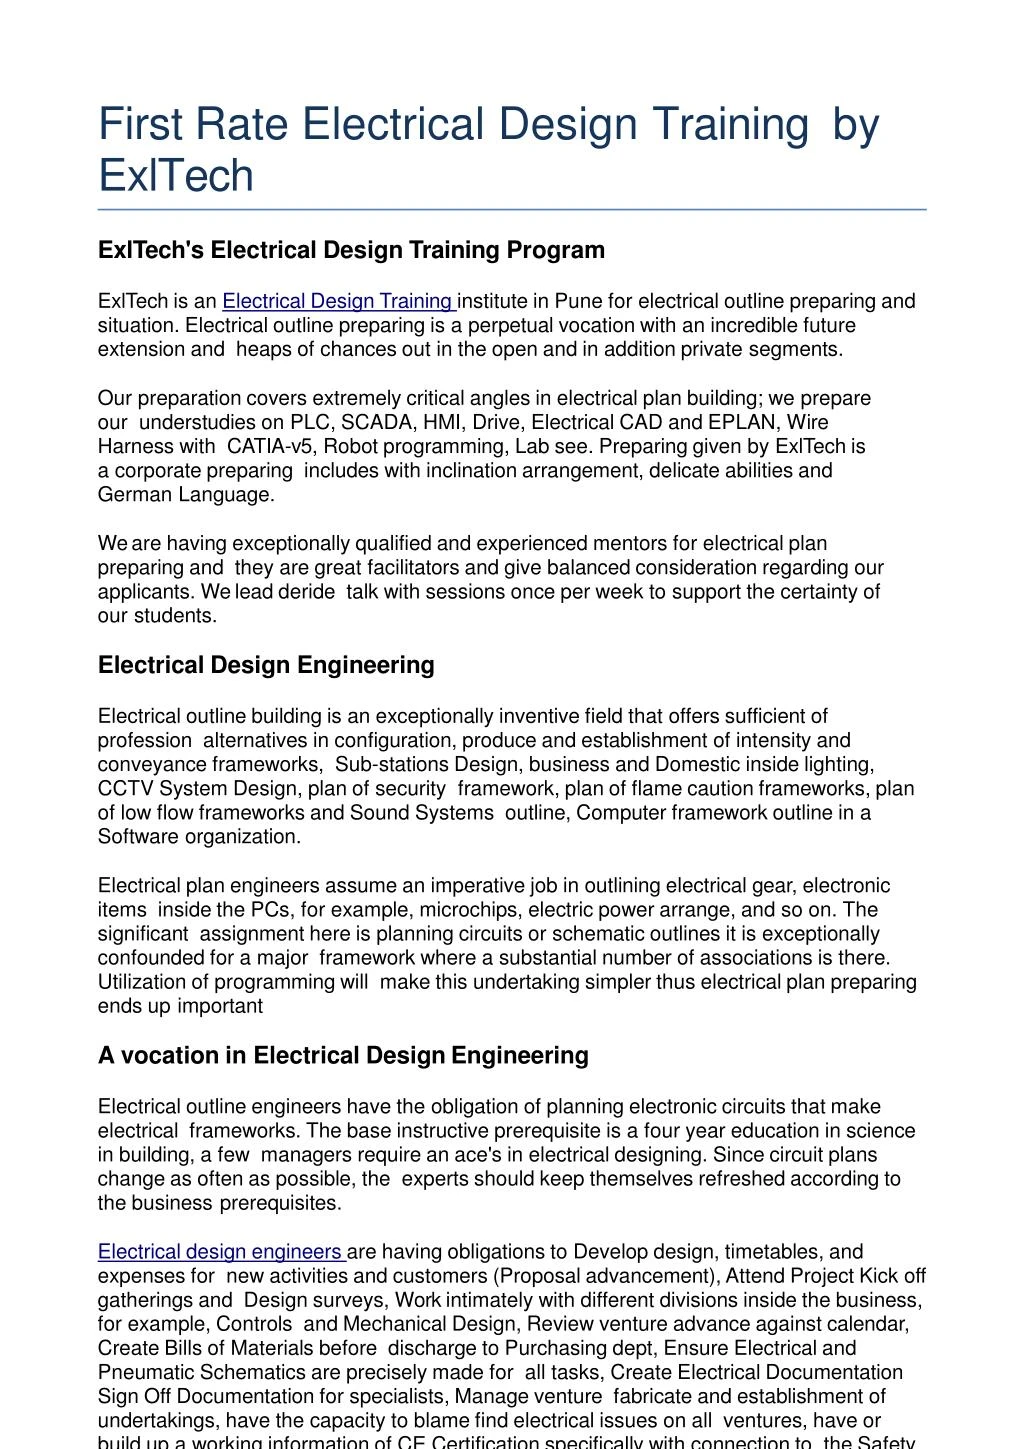 first rate electrical design training by exltech